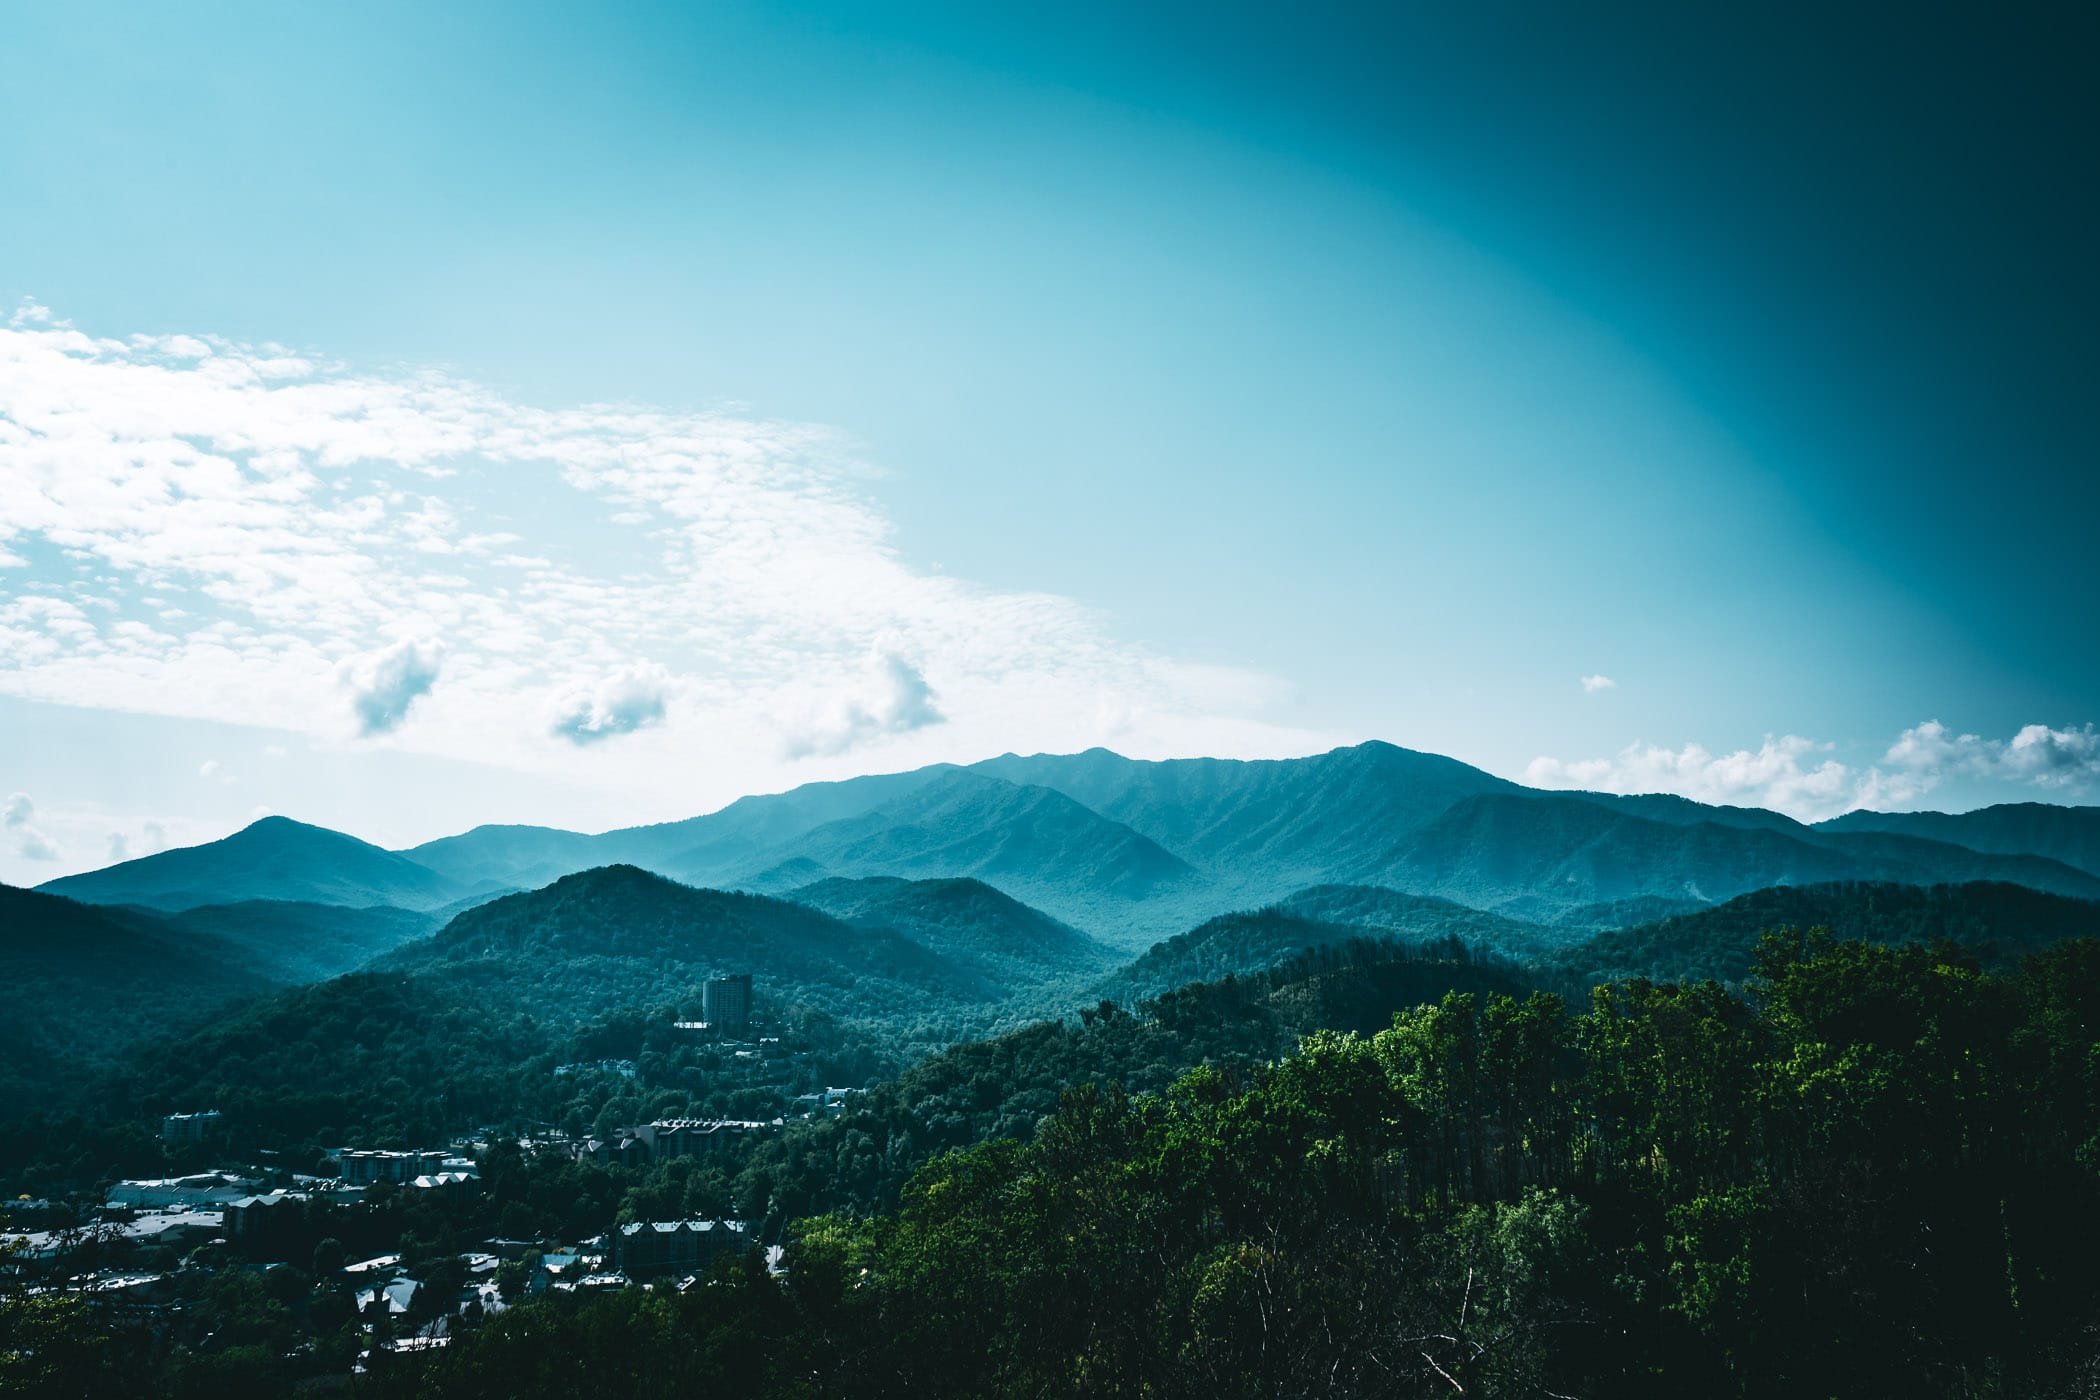 Gatlinburg, Tennessee, nestled in the hazy Great Smoky Mountains.